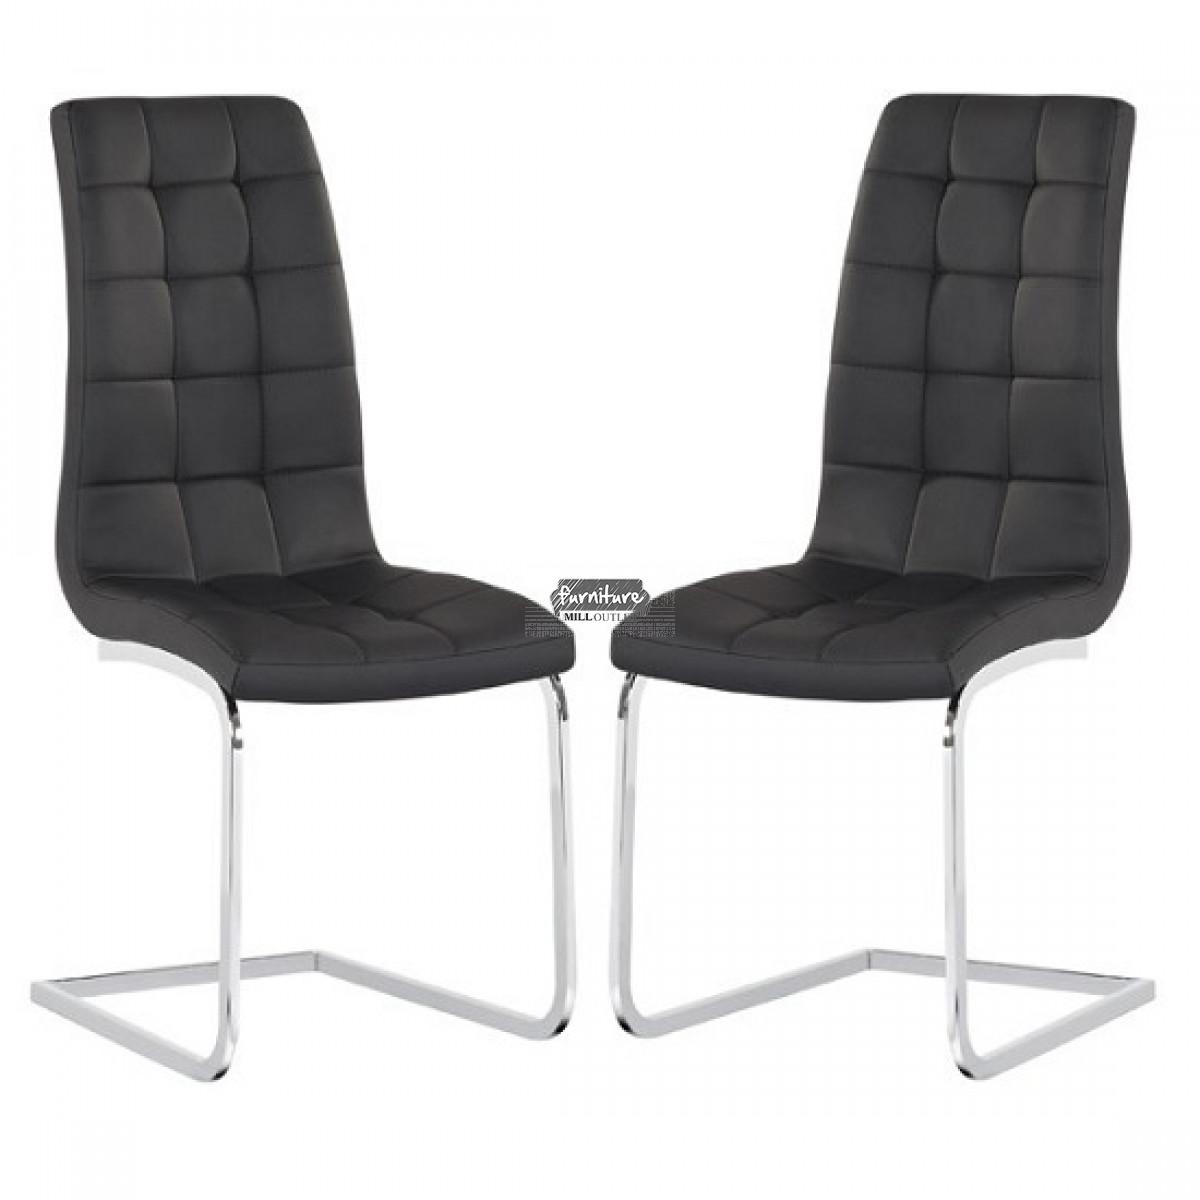 Enzo High Back Faux Leather Dining Chairs Set of 2 | Furniture Mill Outlet